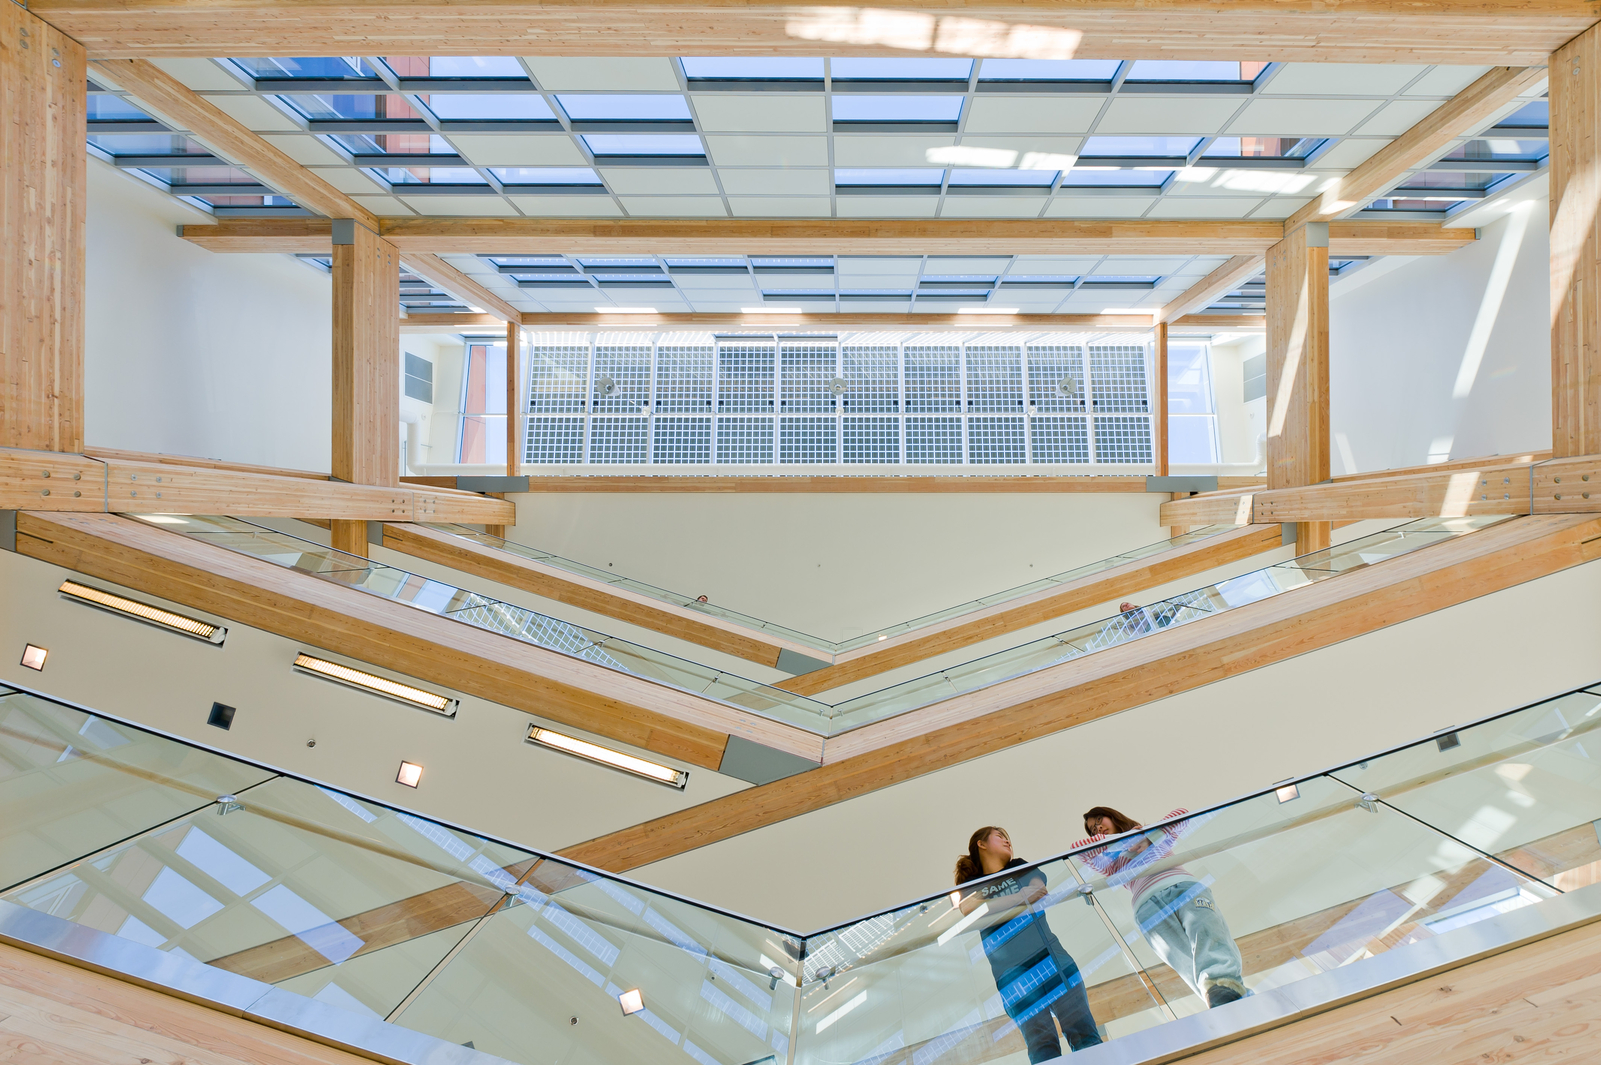 Glue-laminated timber (Glulam) and sustainable design are featured in this four story upward interior atrium view of the Centre for Interactive Research on Sustainability (CIRS)